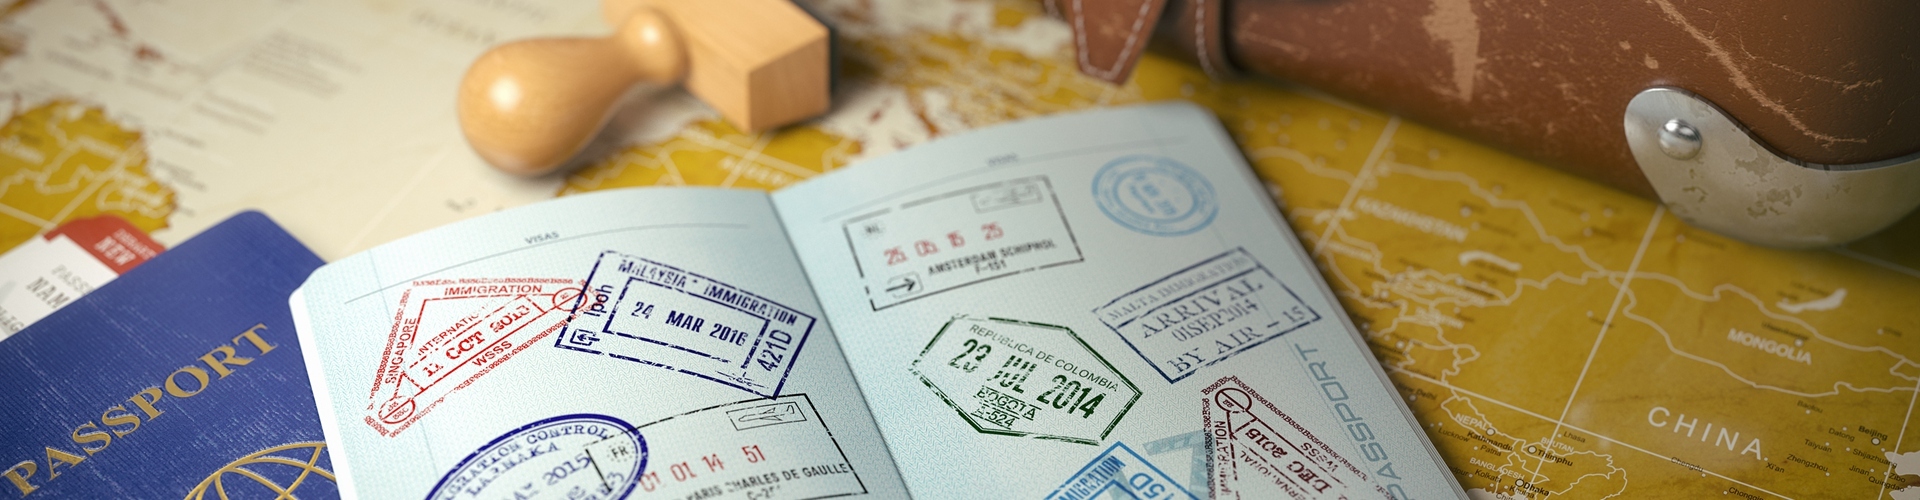 China Travel Visas – Common Questions and Answers